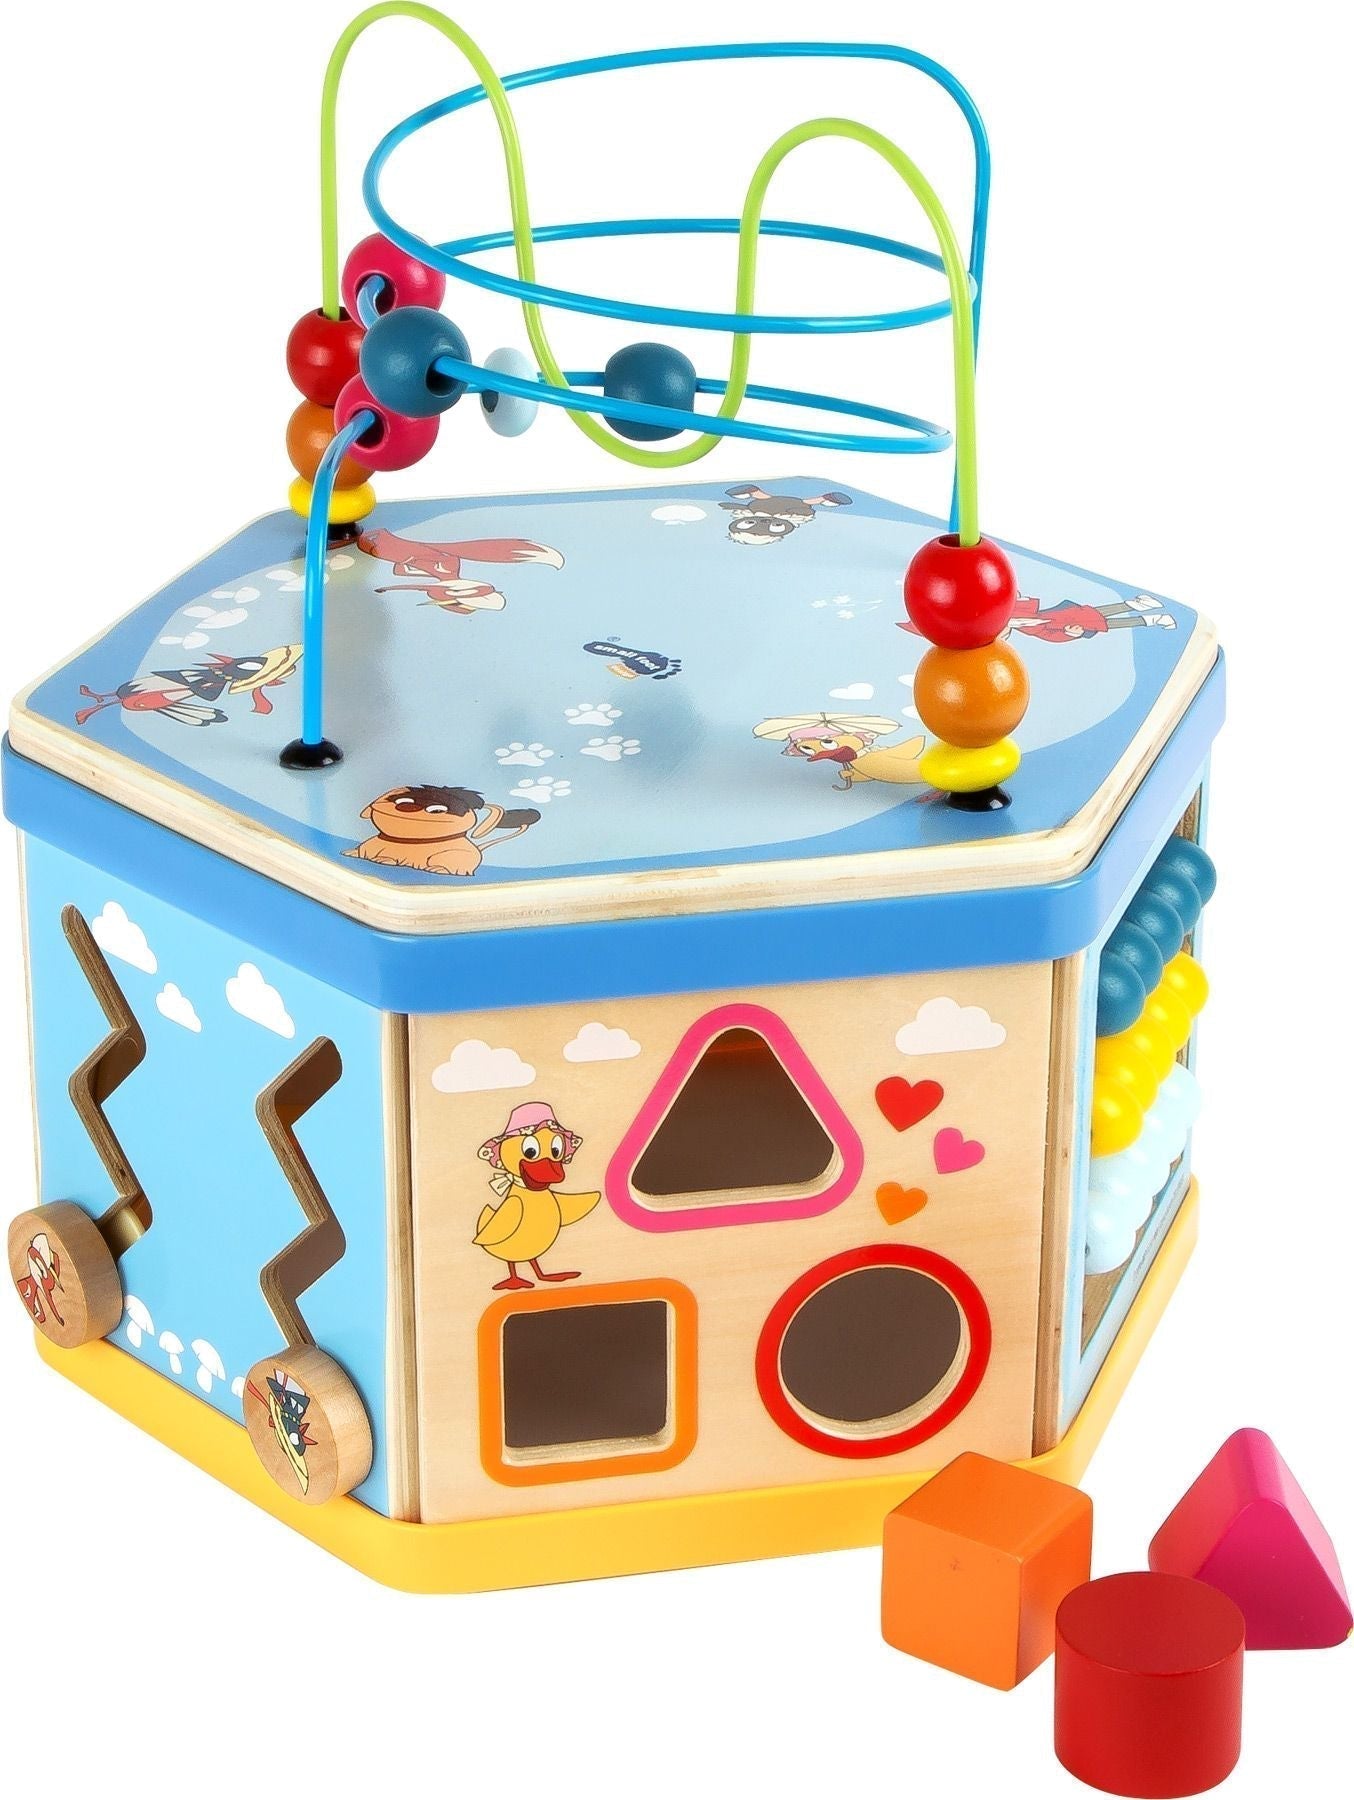 Sandman Motor Skills Training Cube, Looking for a fun and engaging toy that will help your child develop important motor skills and abilities? Look no further than the Sandman Motor Skills Training Cube! Made from sturdy wood and featuring colorful images of Sandman and his friends, this cube is packed with exciting features that will keep your child entertained for hours. Each side of the cube offers a different function for playing, including a motor skills training loop that can be removed to empty out t